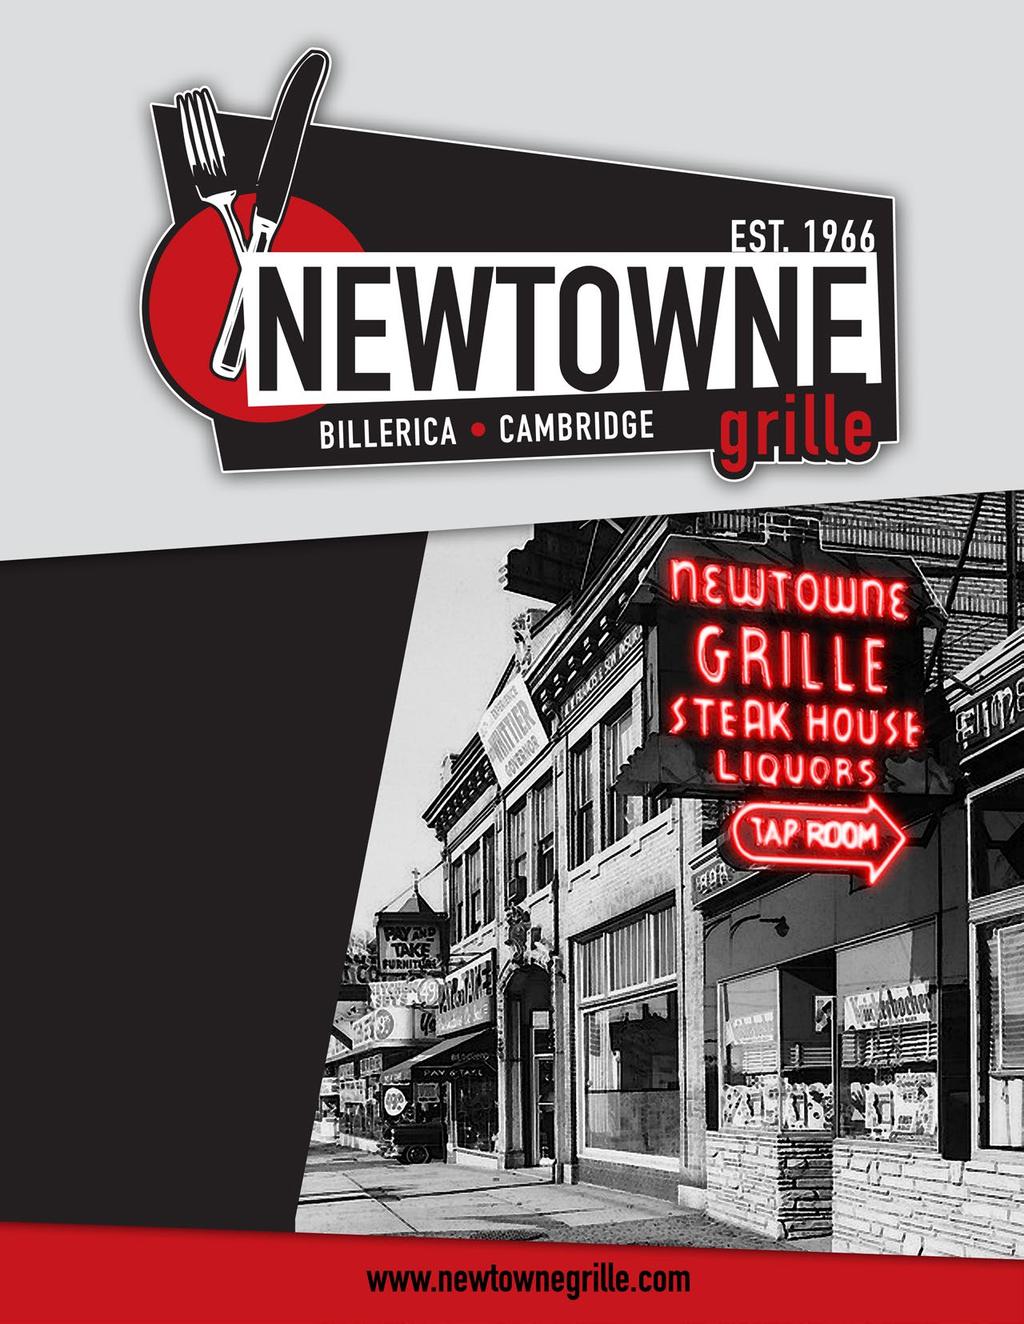 In 1966, Socrates Toulopoulos opened the doors of Newtowne Grille located at 1945 Massachusetts Ave in Porter Square, Cambridge.